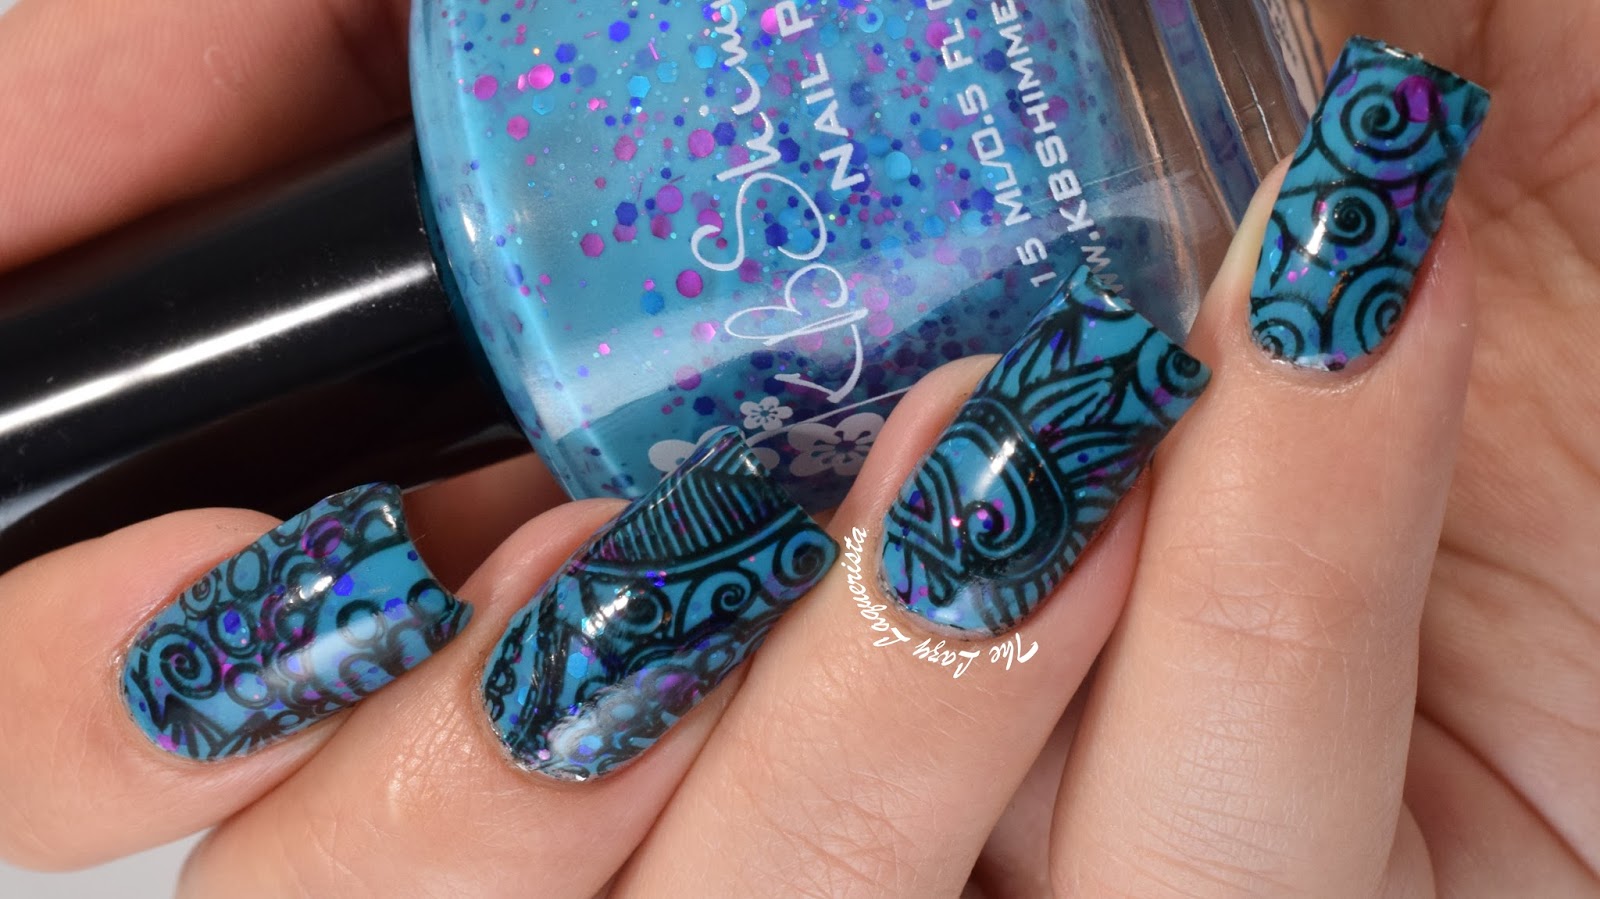 4. Affordable Stamped Nail Art Place in Houston - wide 5